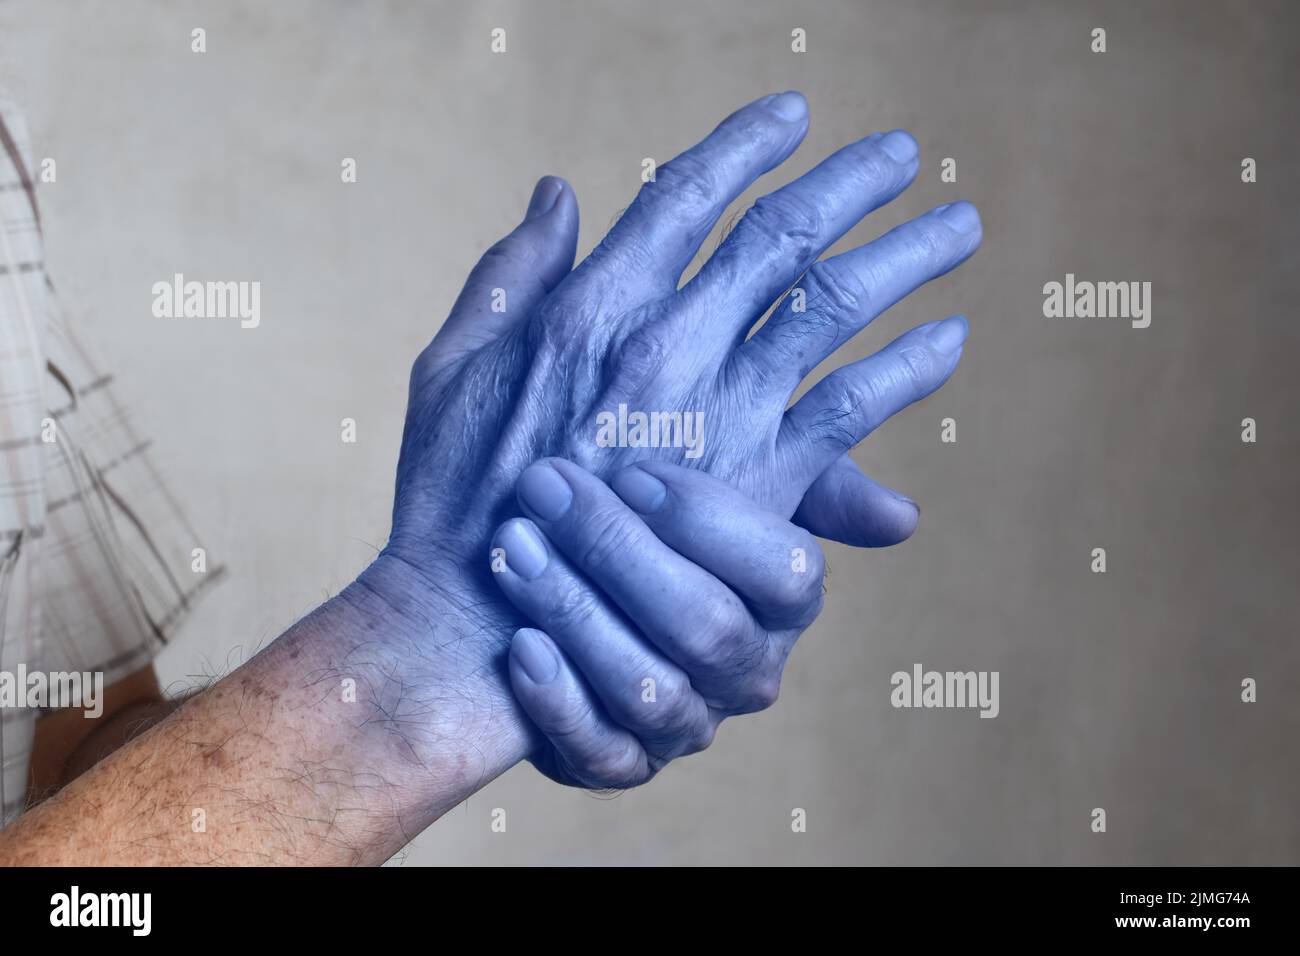 Light blue colored hands of Asian old man. Concept of cold and clumsy hand. Stock Photo